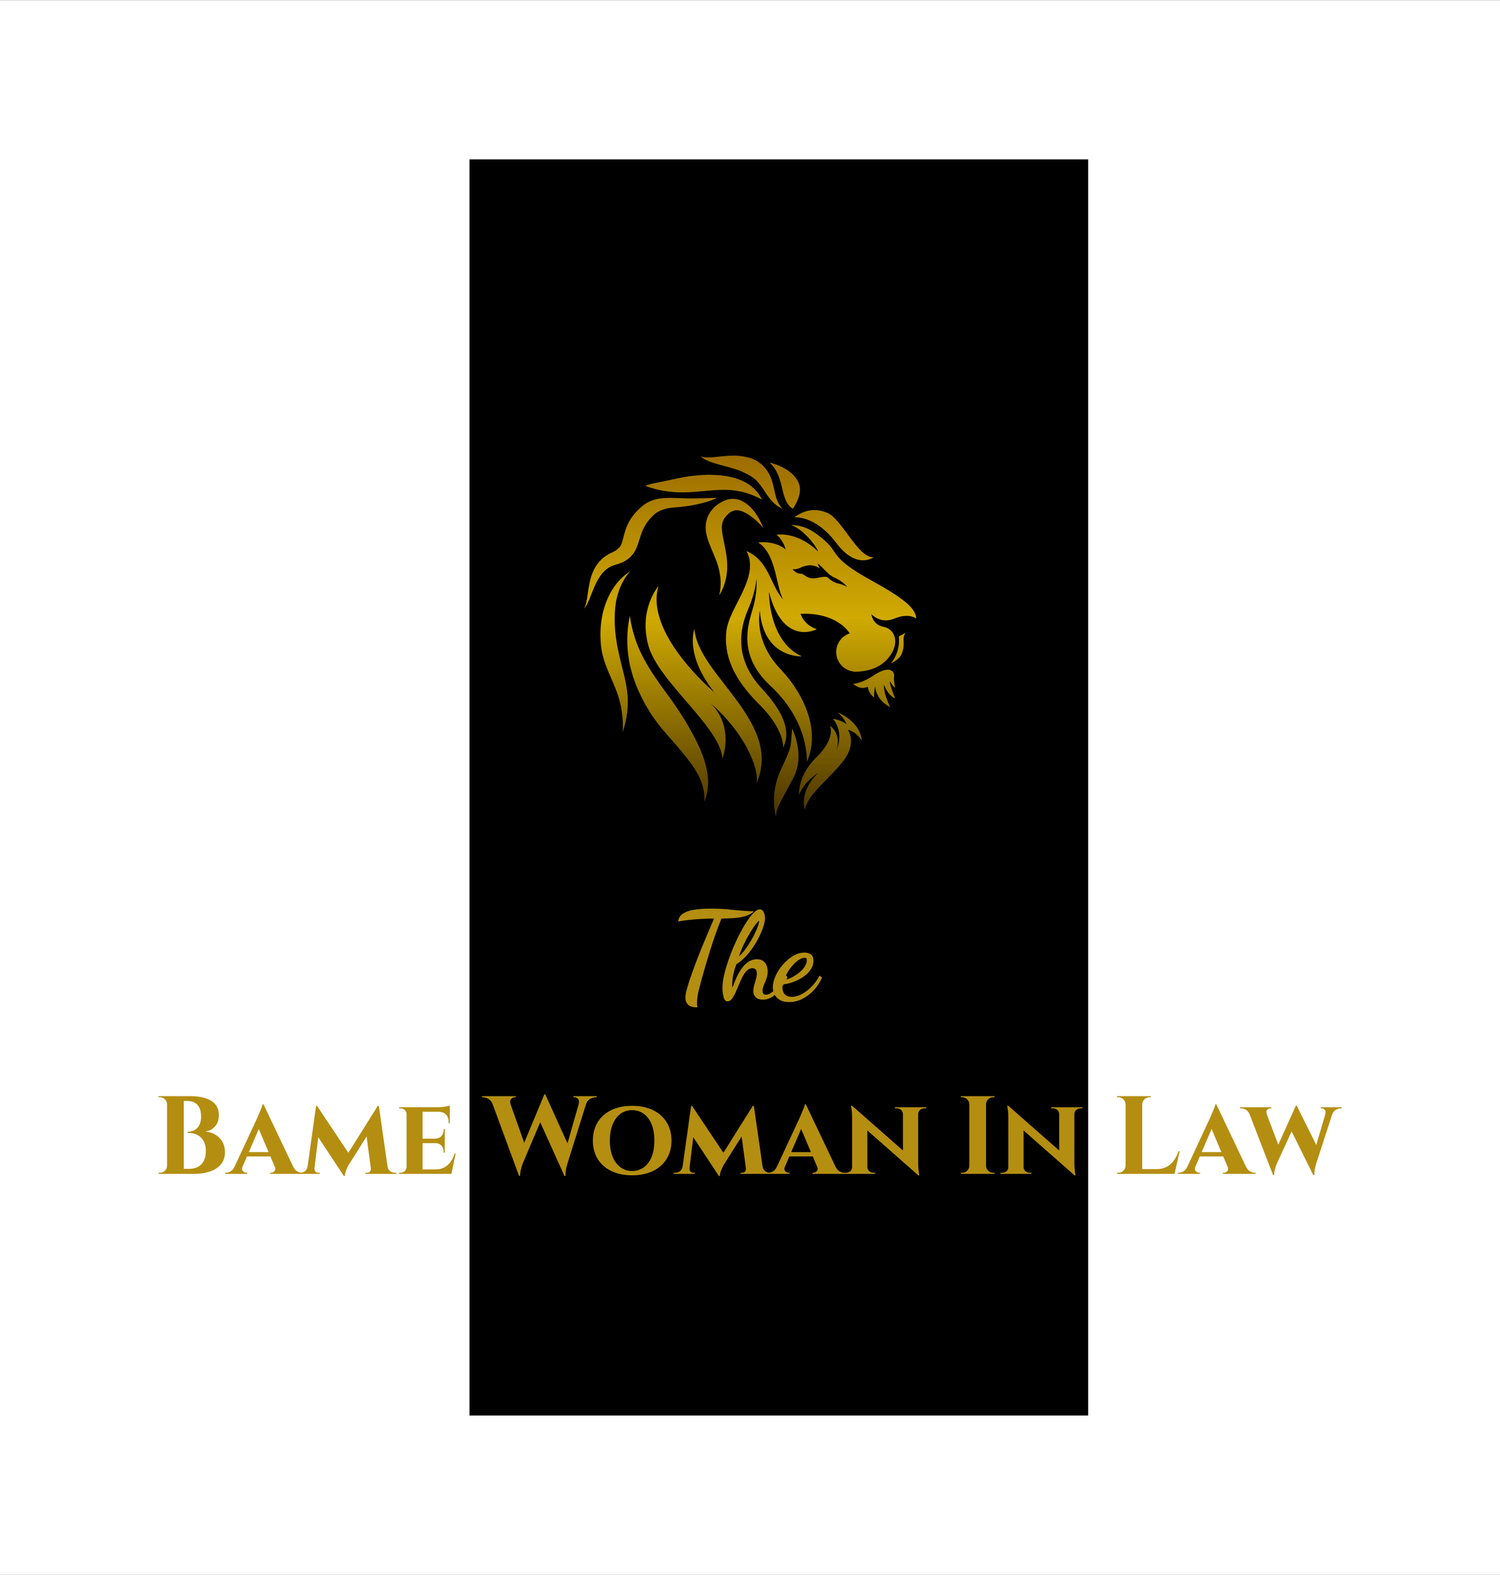 The BAME Woman in Law